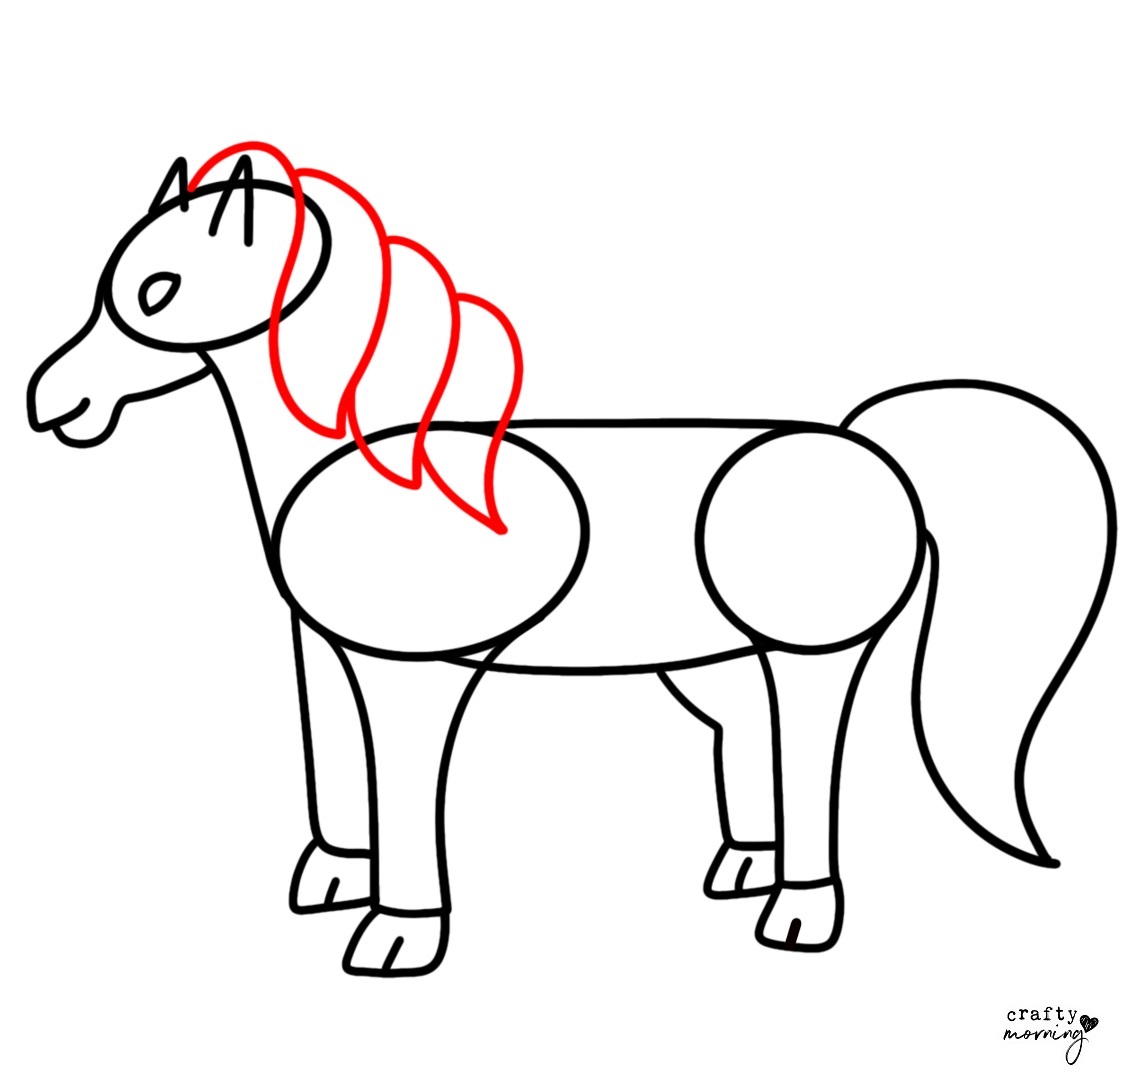 How to Draw a Horse - Easy Drawing Art